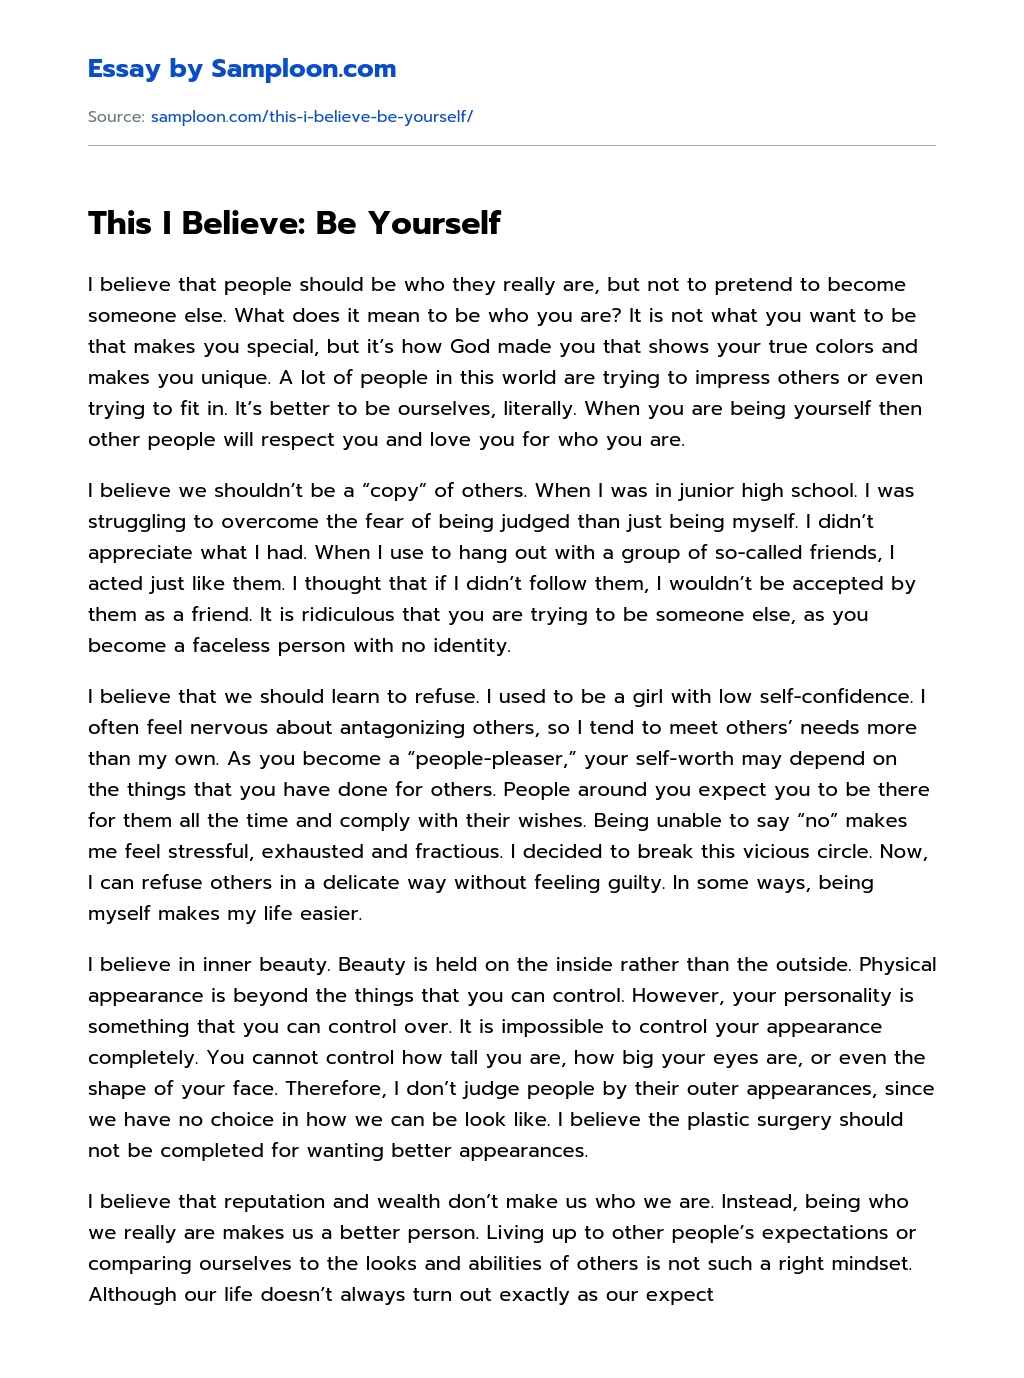 This I Believe: Be Yourself essay